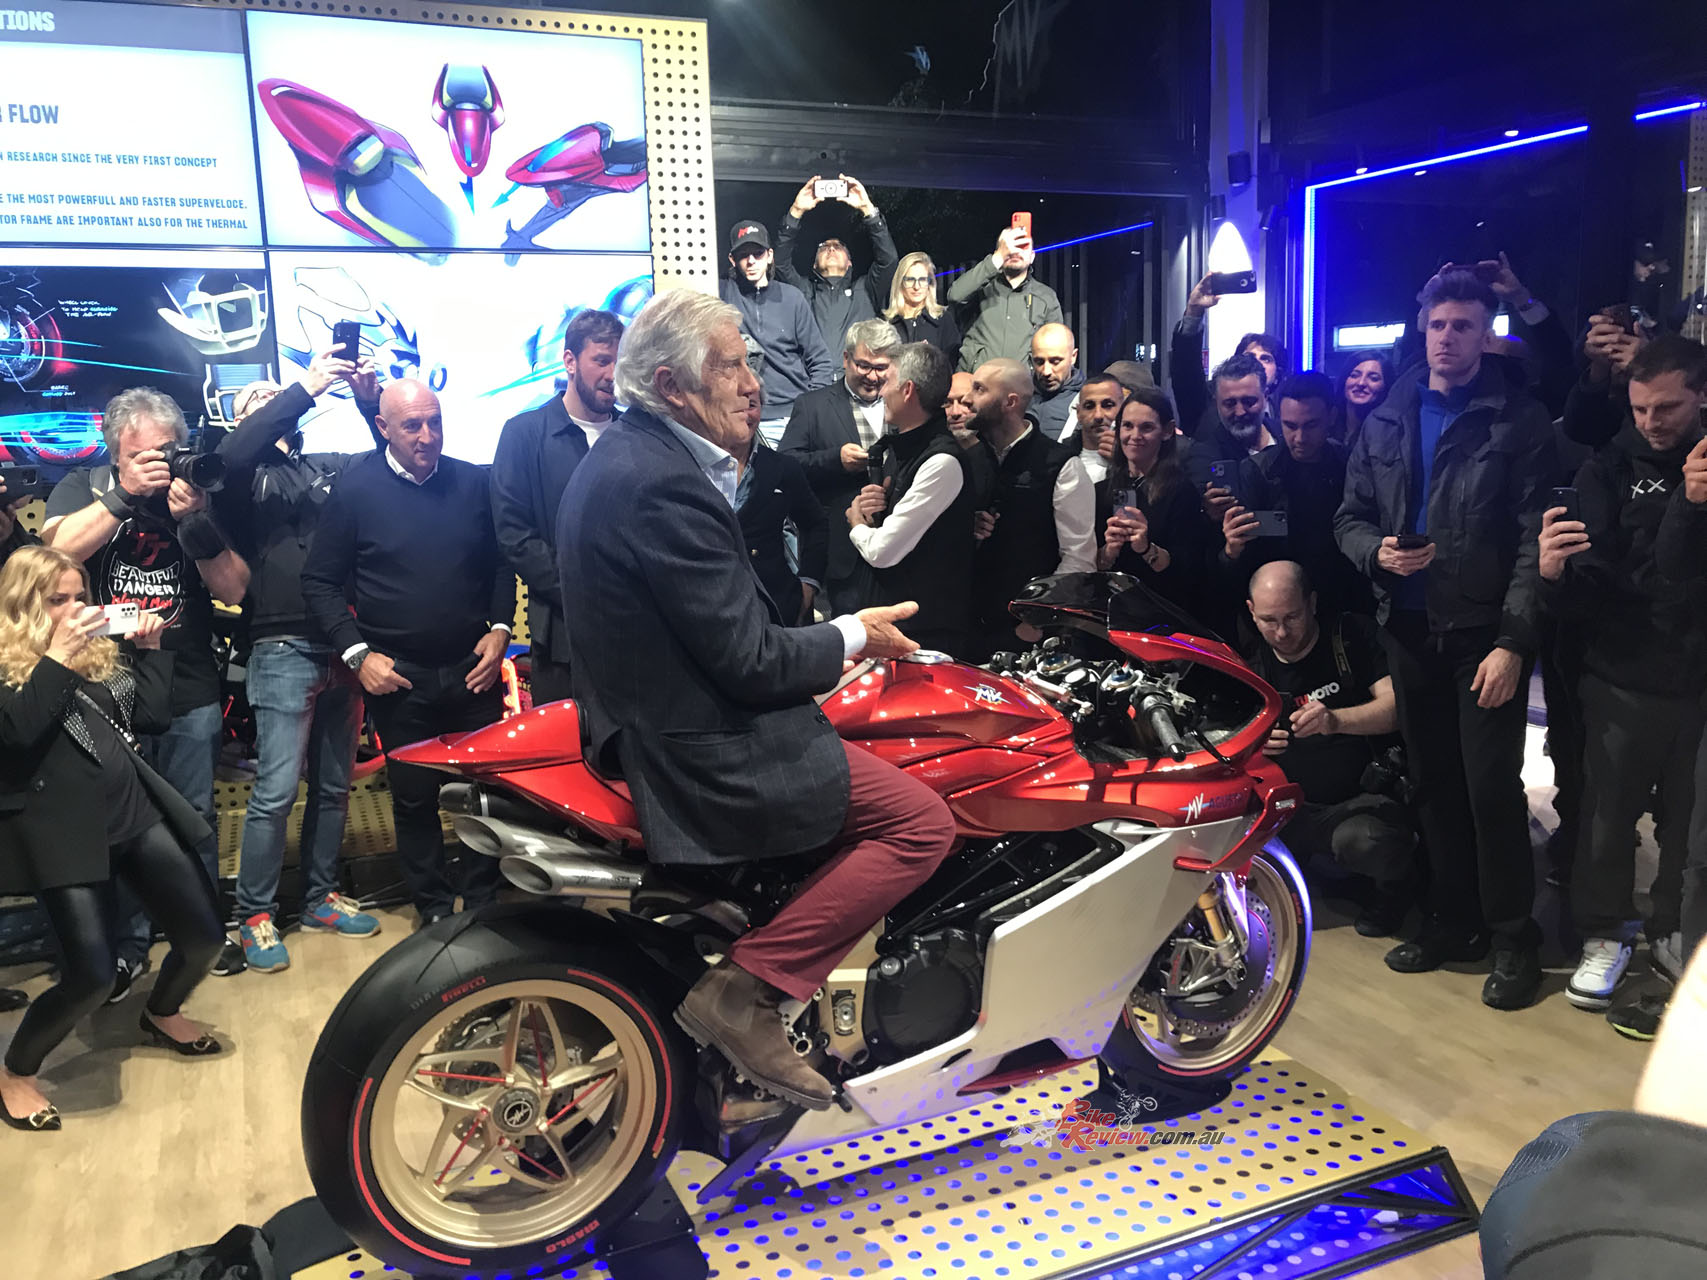 The exquisite new four-cylinder Superveloce 1000 unveiled last November by MV Agusta GP legend Giacomo Agostini will enter production this coming September in limited-edition 300-off Serie Oro form.